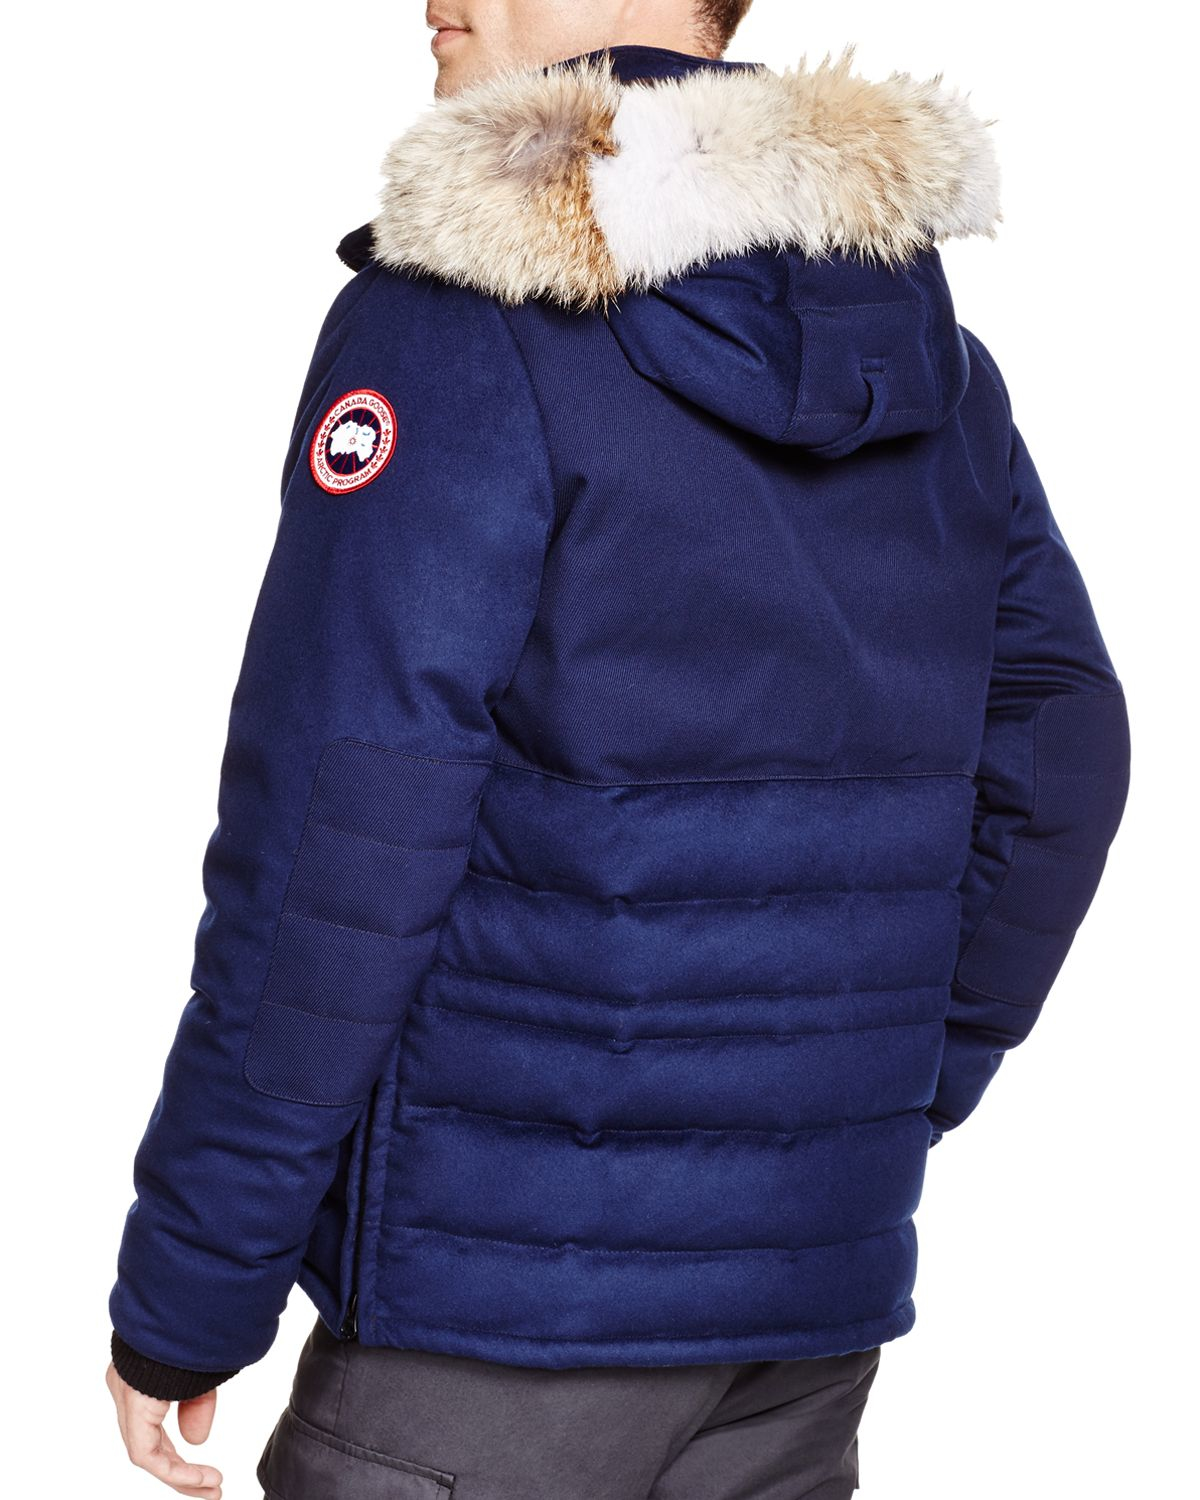 Canada Goose vest outlet cheap - Canada goose Chatham Parka - 100% Bloomingdale's Exclusive in Blue ...